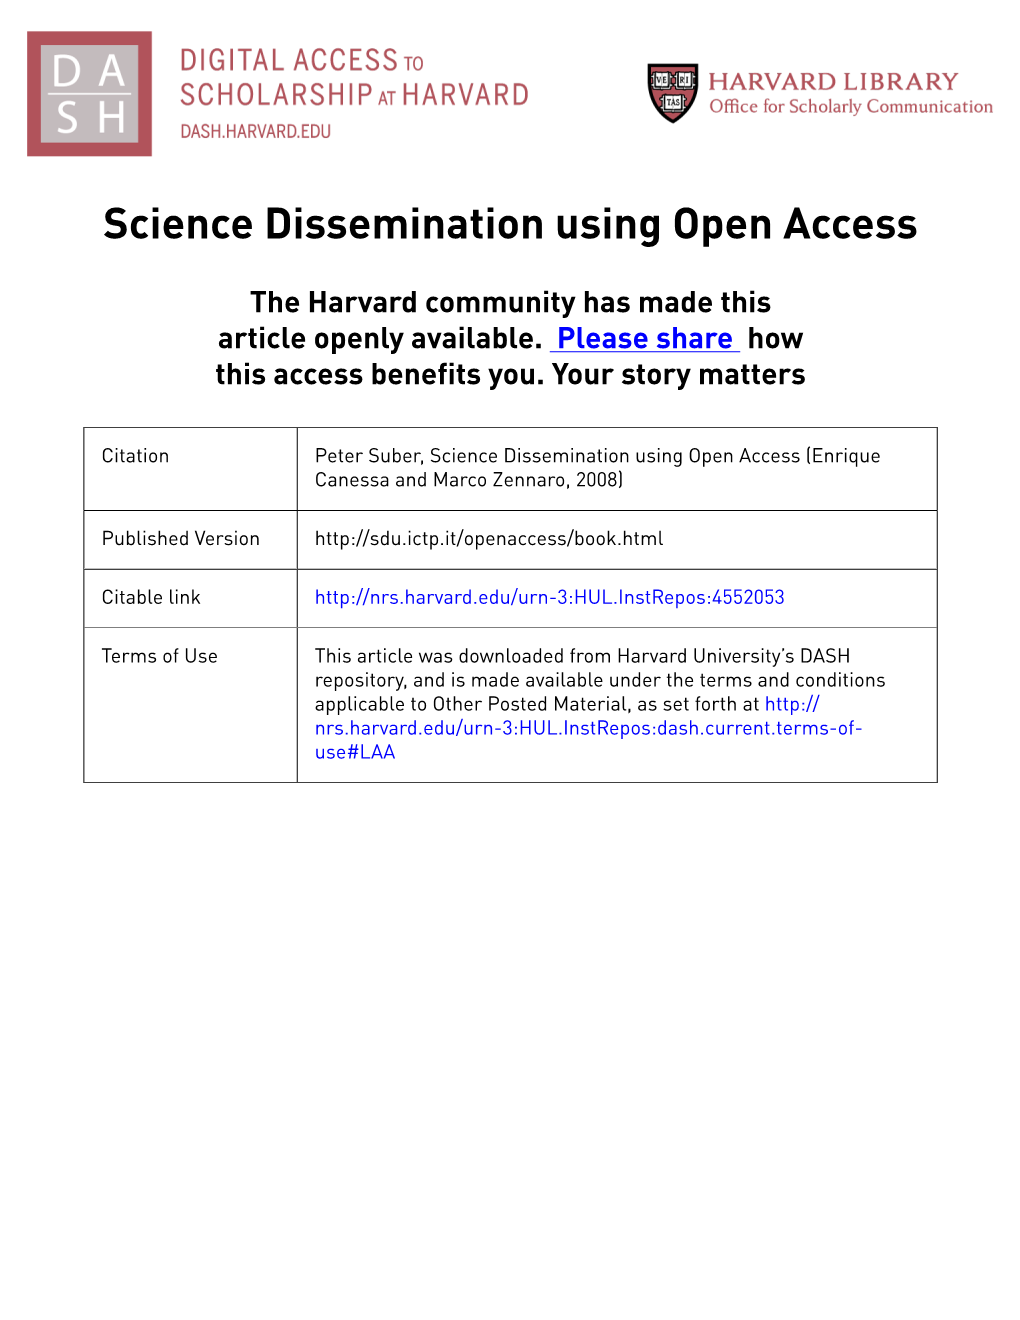 Science Dissemination Using Open Access